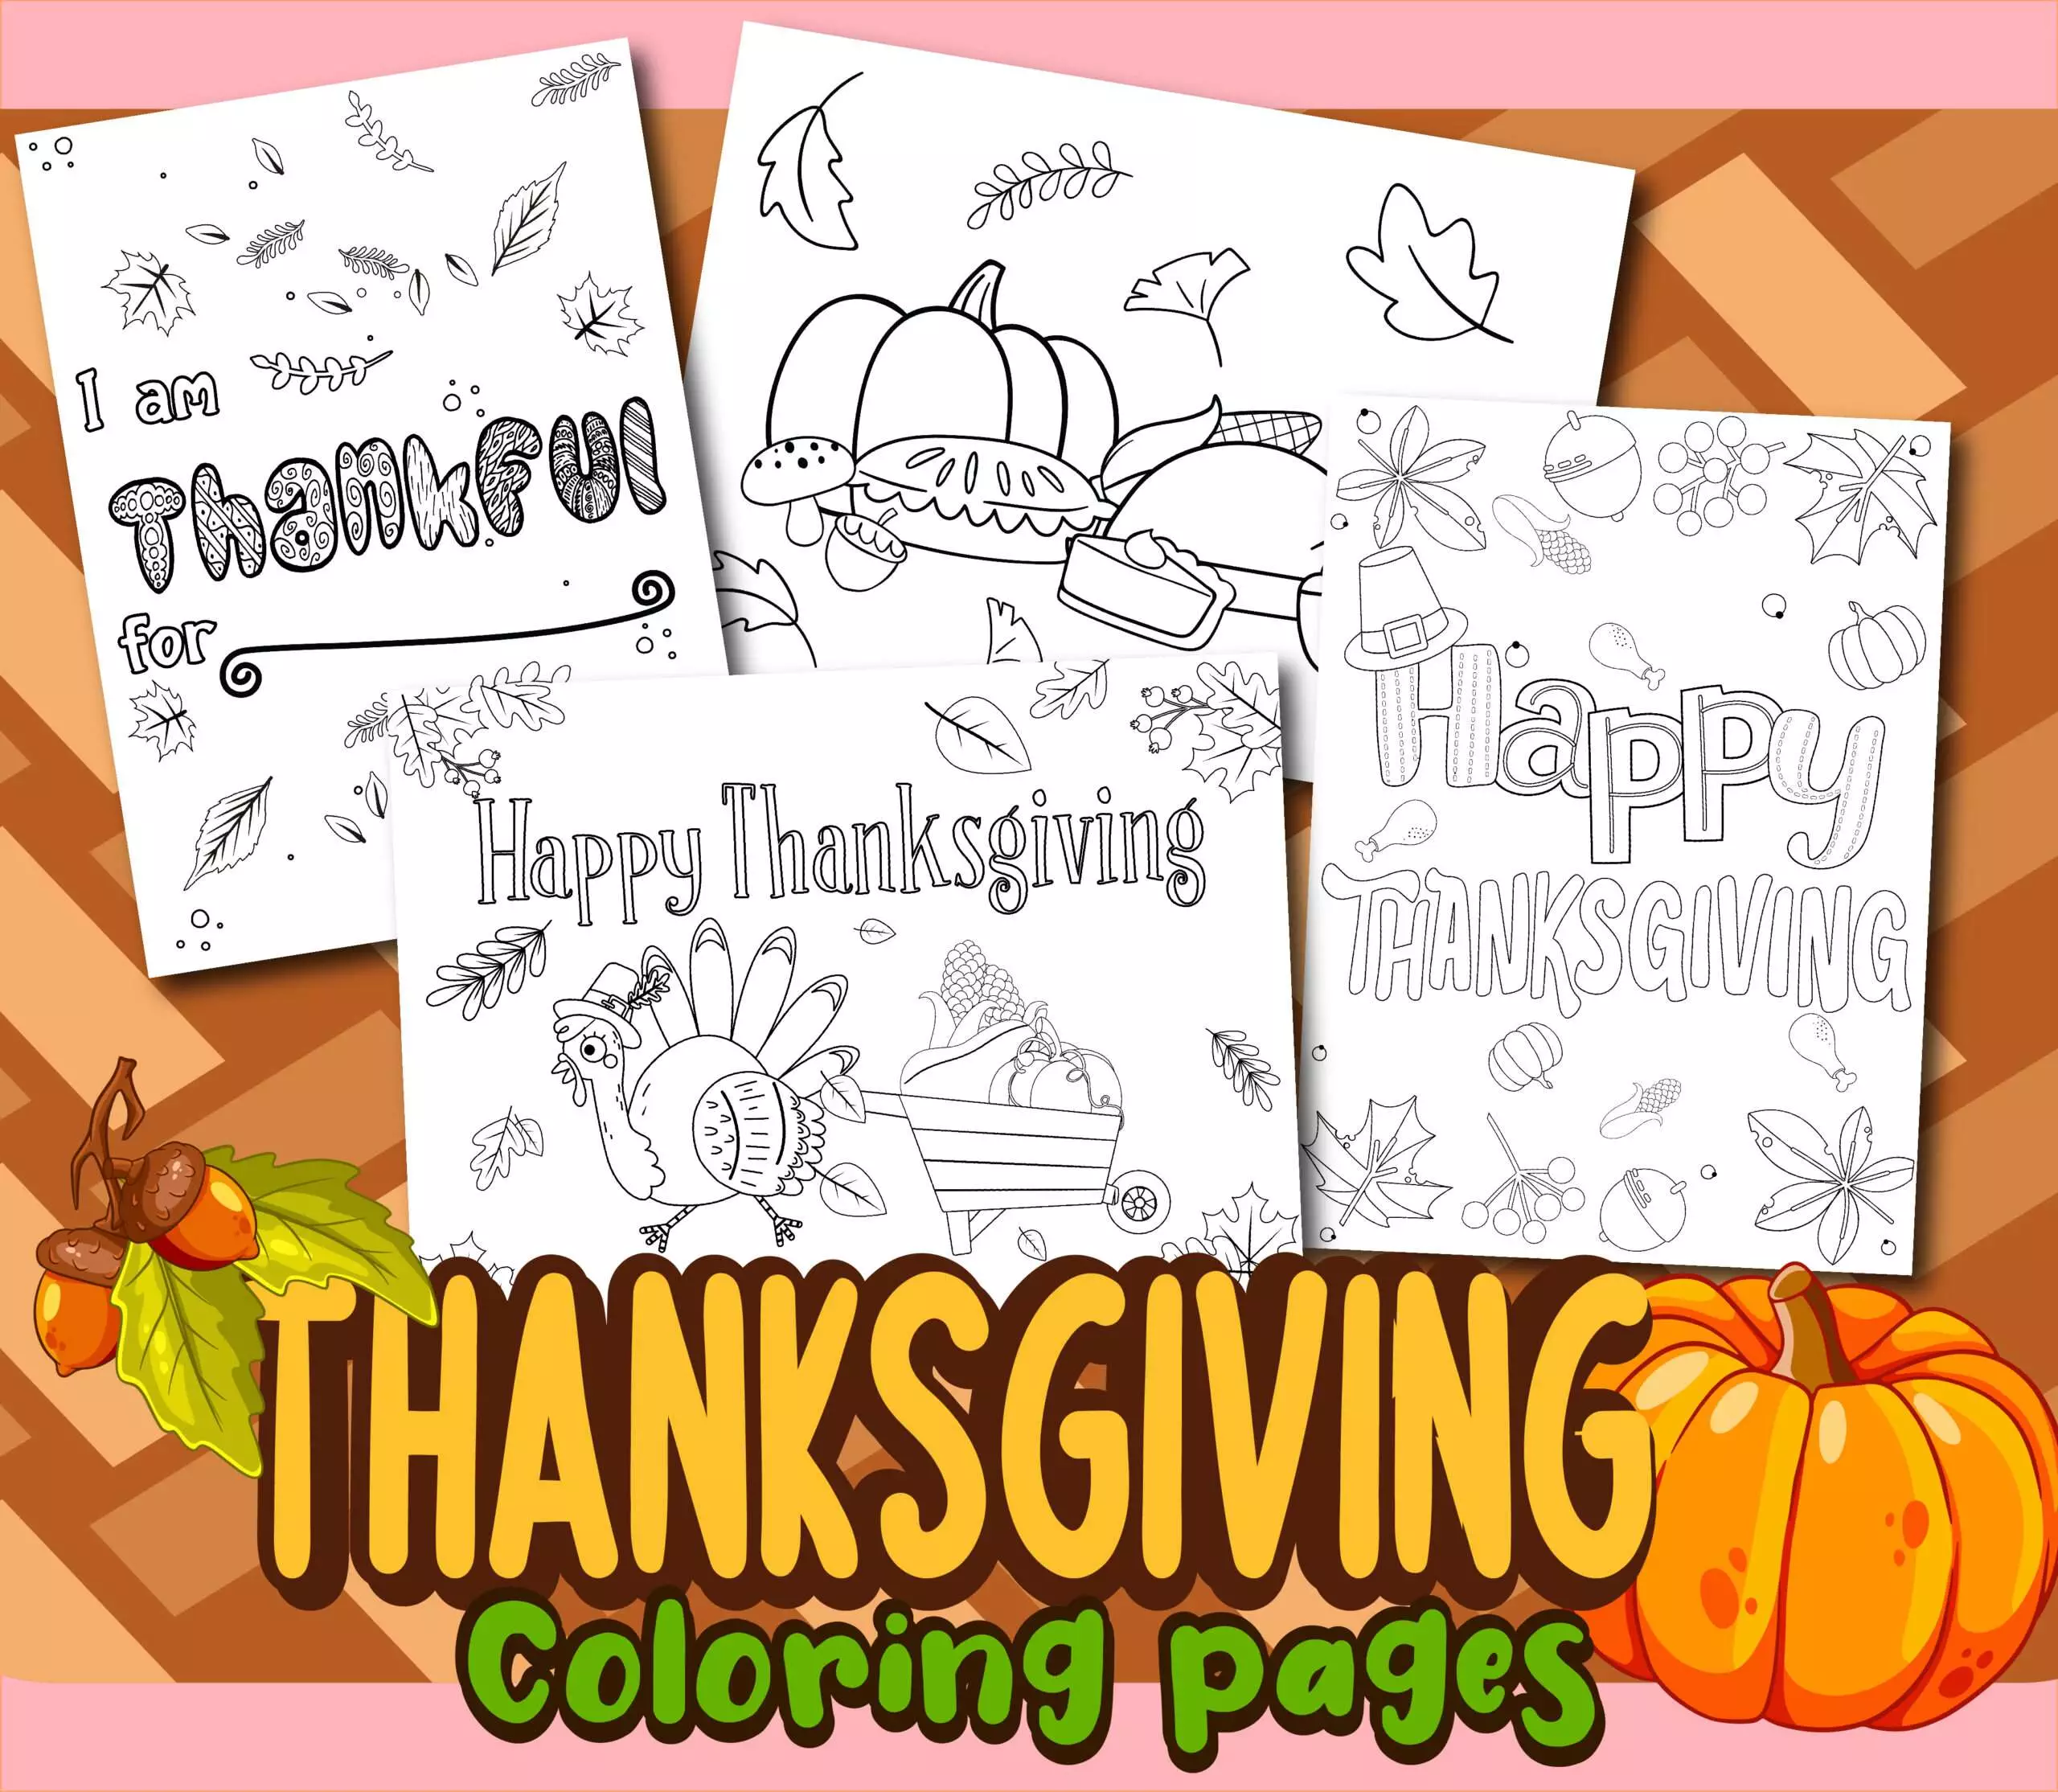 Thanksgiving color pages mockup